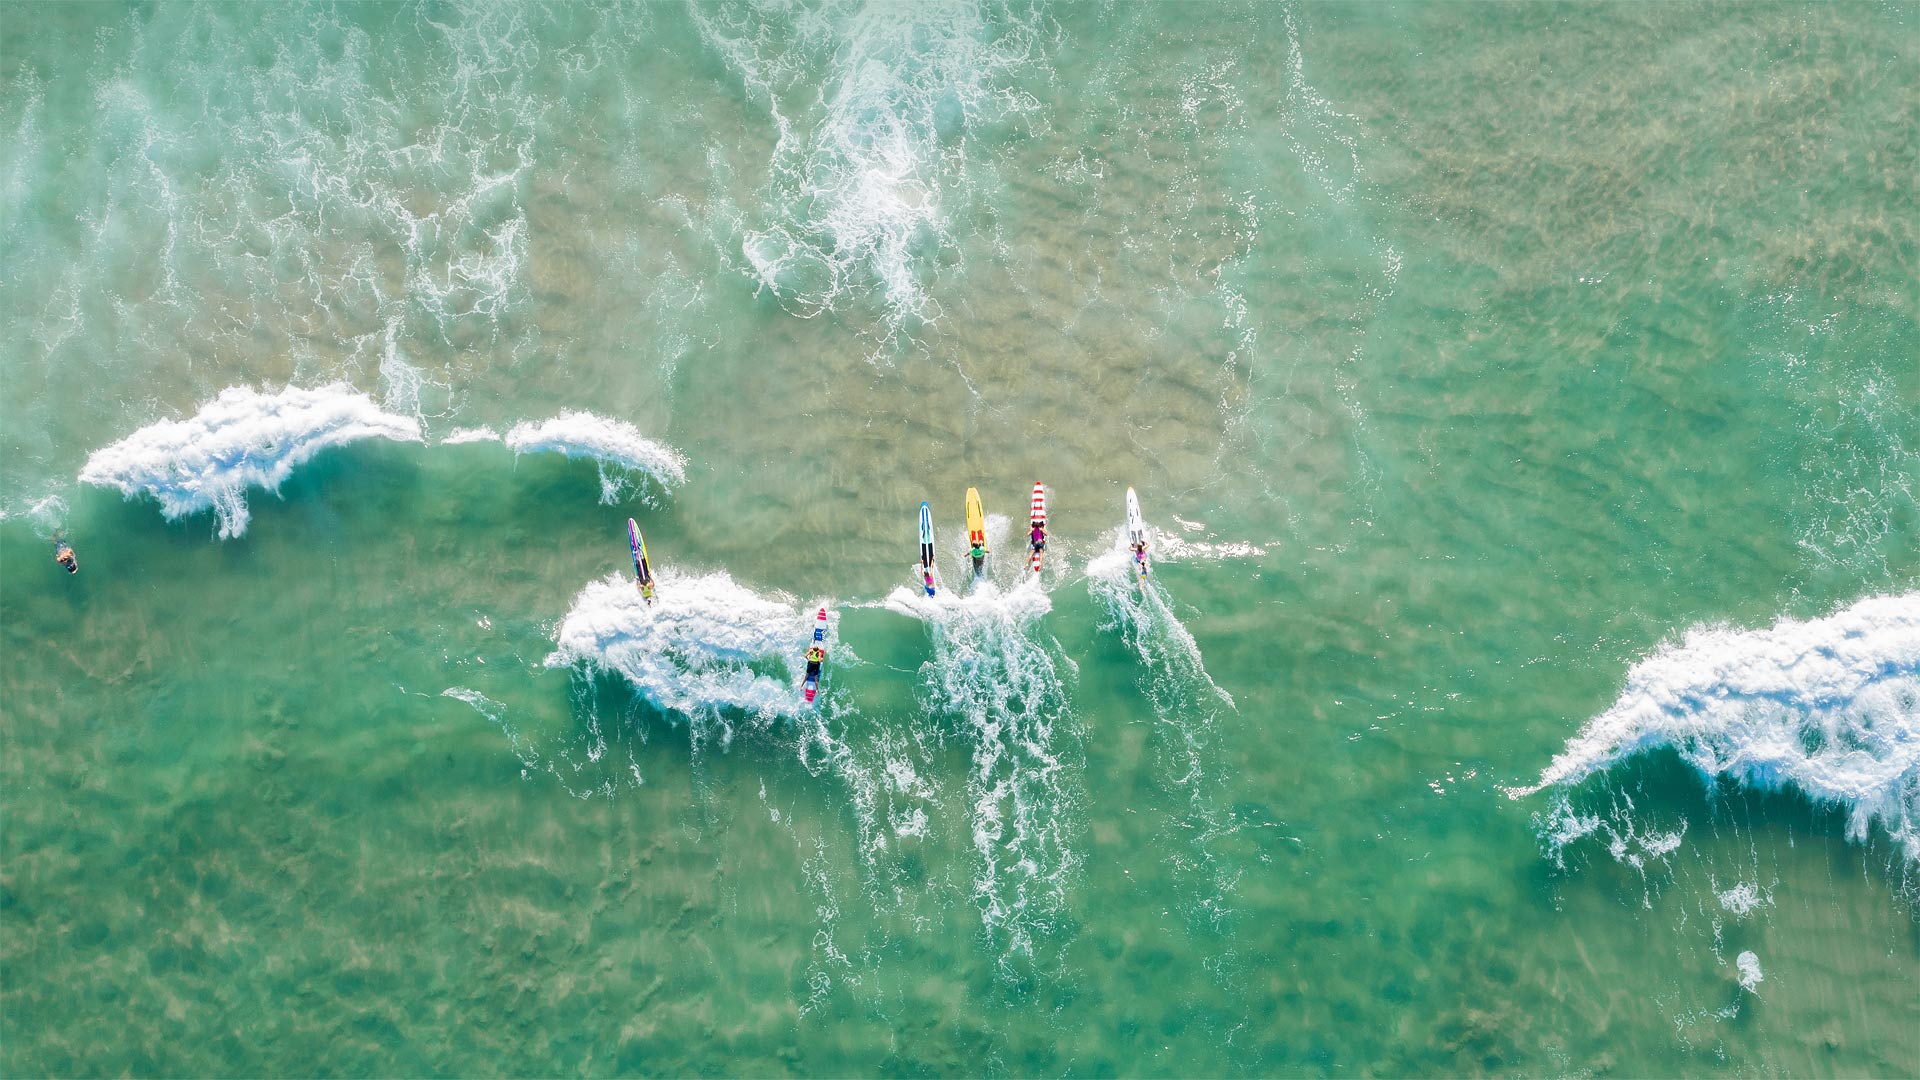 People surfing at Burleigh Heads, Gold Coast, Australia - Vicki Smith/Getty Images)